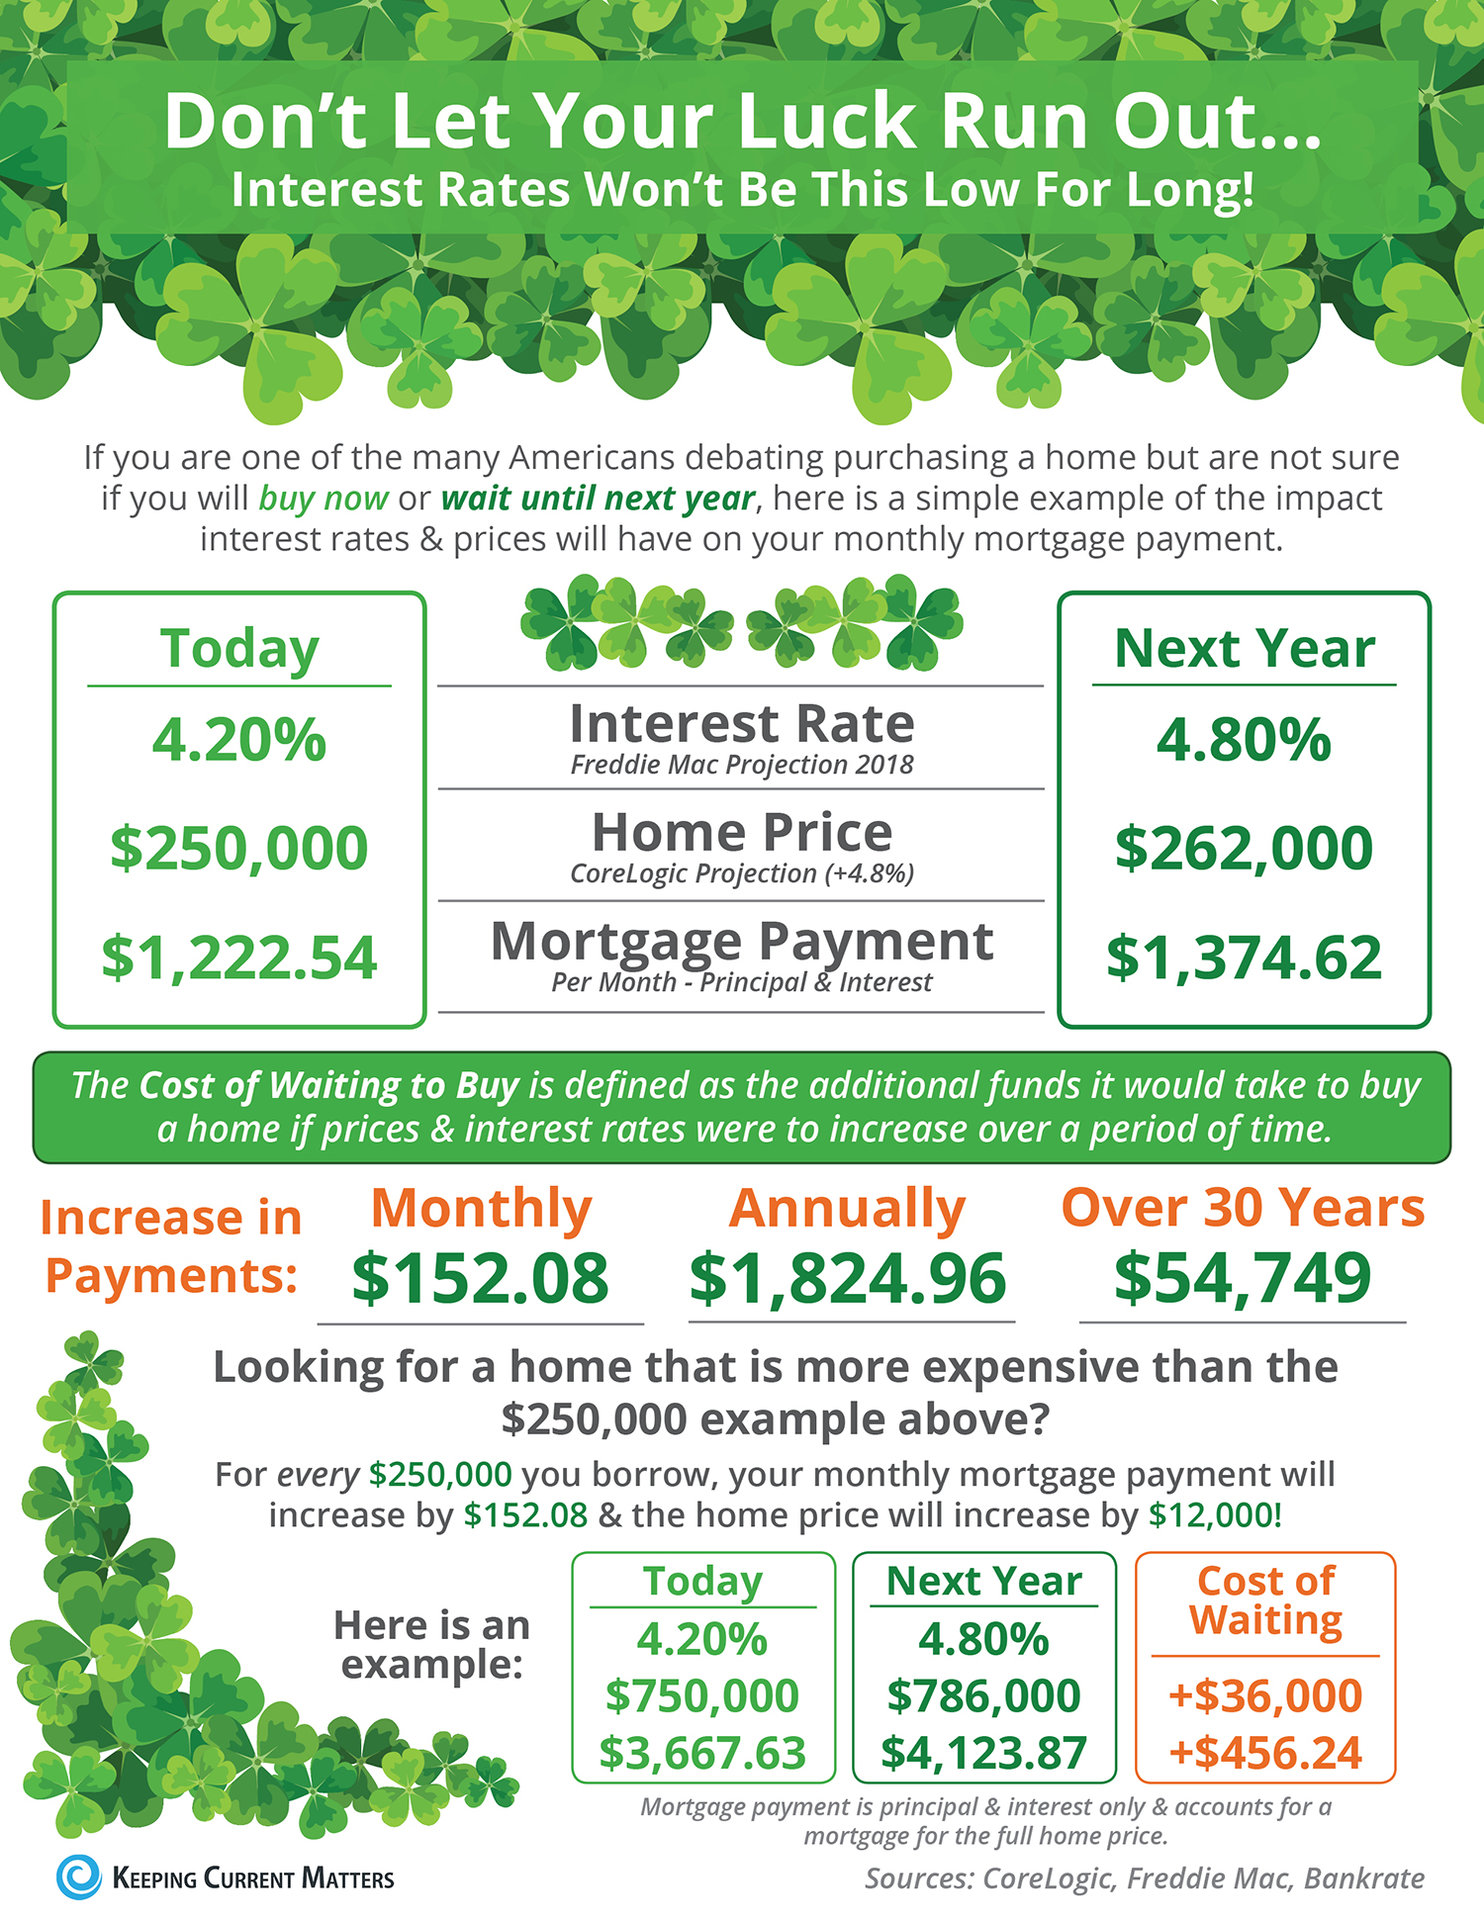 Don’t Let Your Luck Run Out [INFOGRAPHIC] | Keeping Current Matters